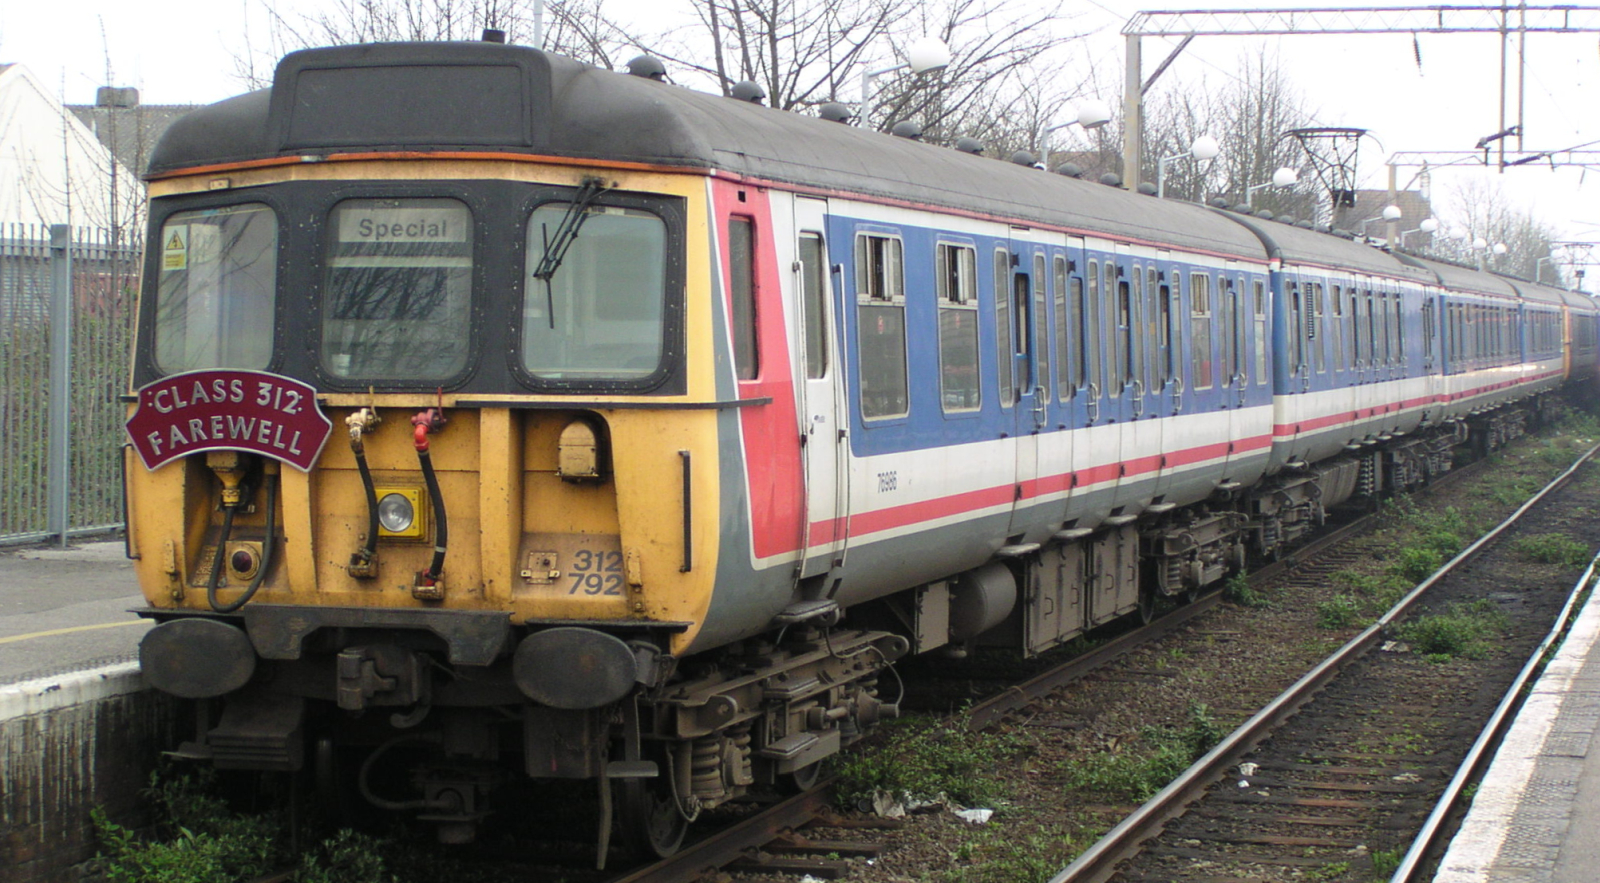 312792 in March 2003 at Shoeburyness